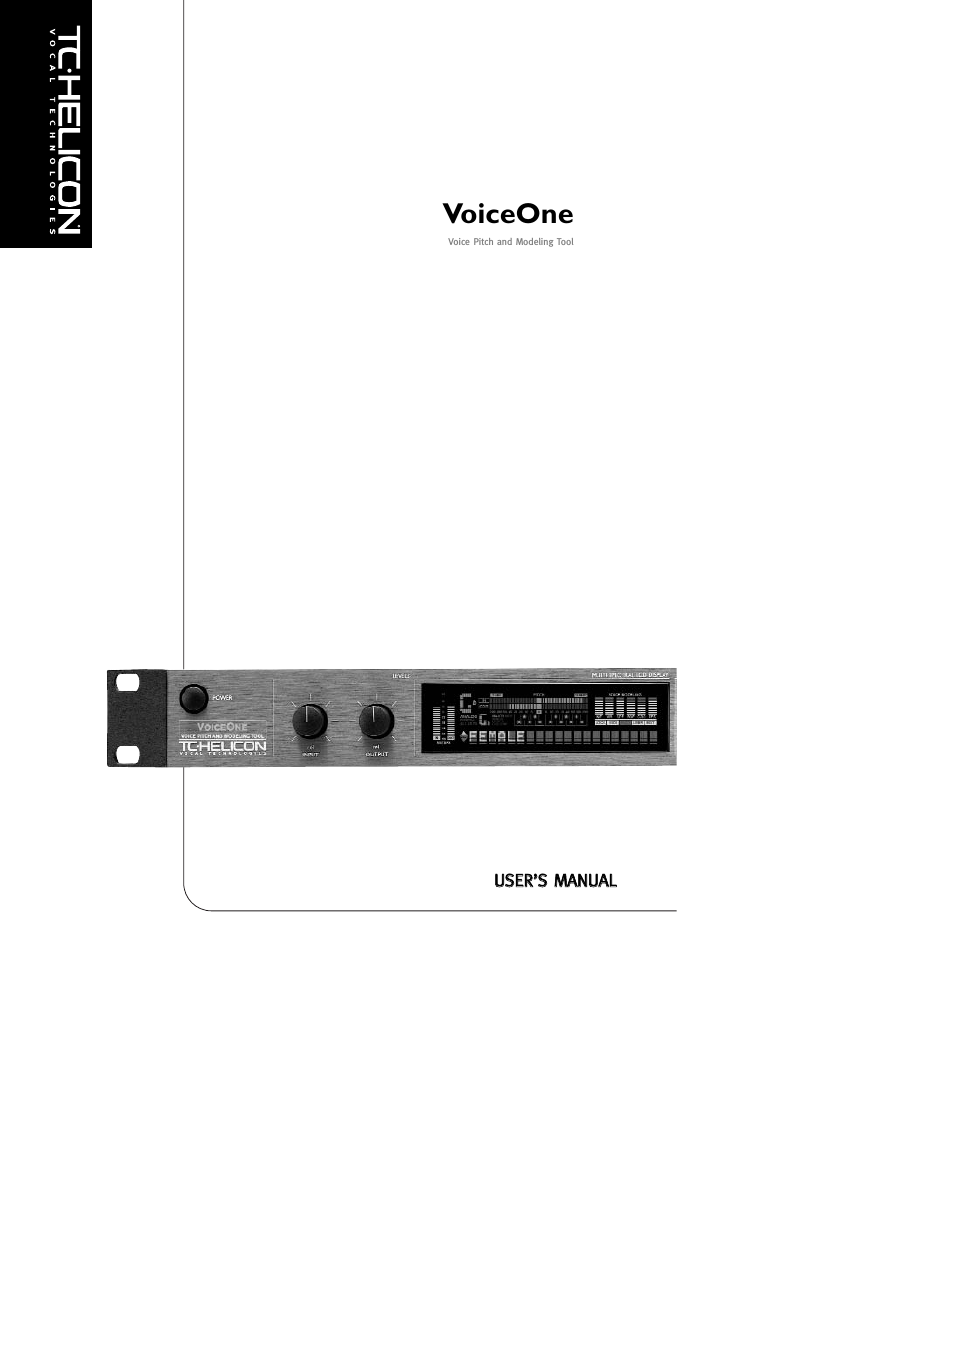 VoiceOne Manual